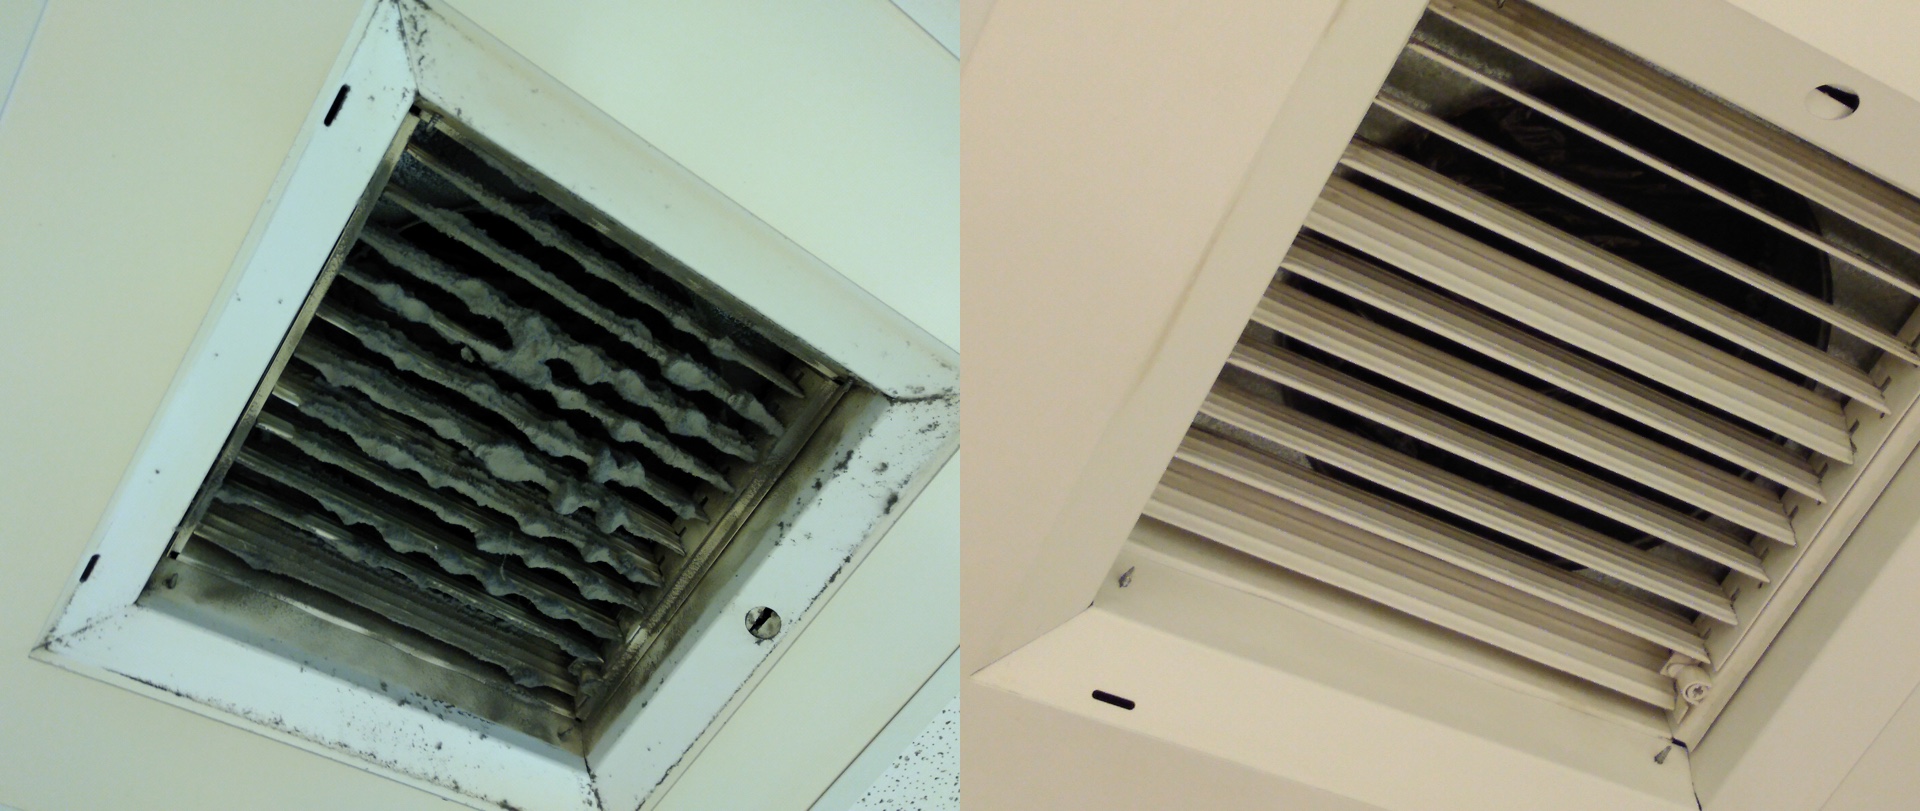 Air Duct Cleaning | Philadelphia & South Jersey | Dryer Vent Cleaning |  609-265-0775